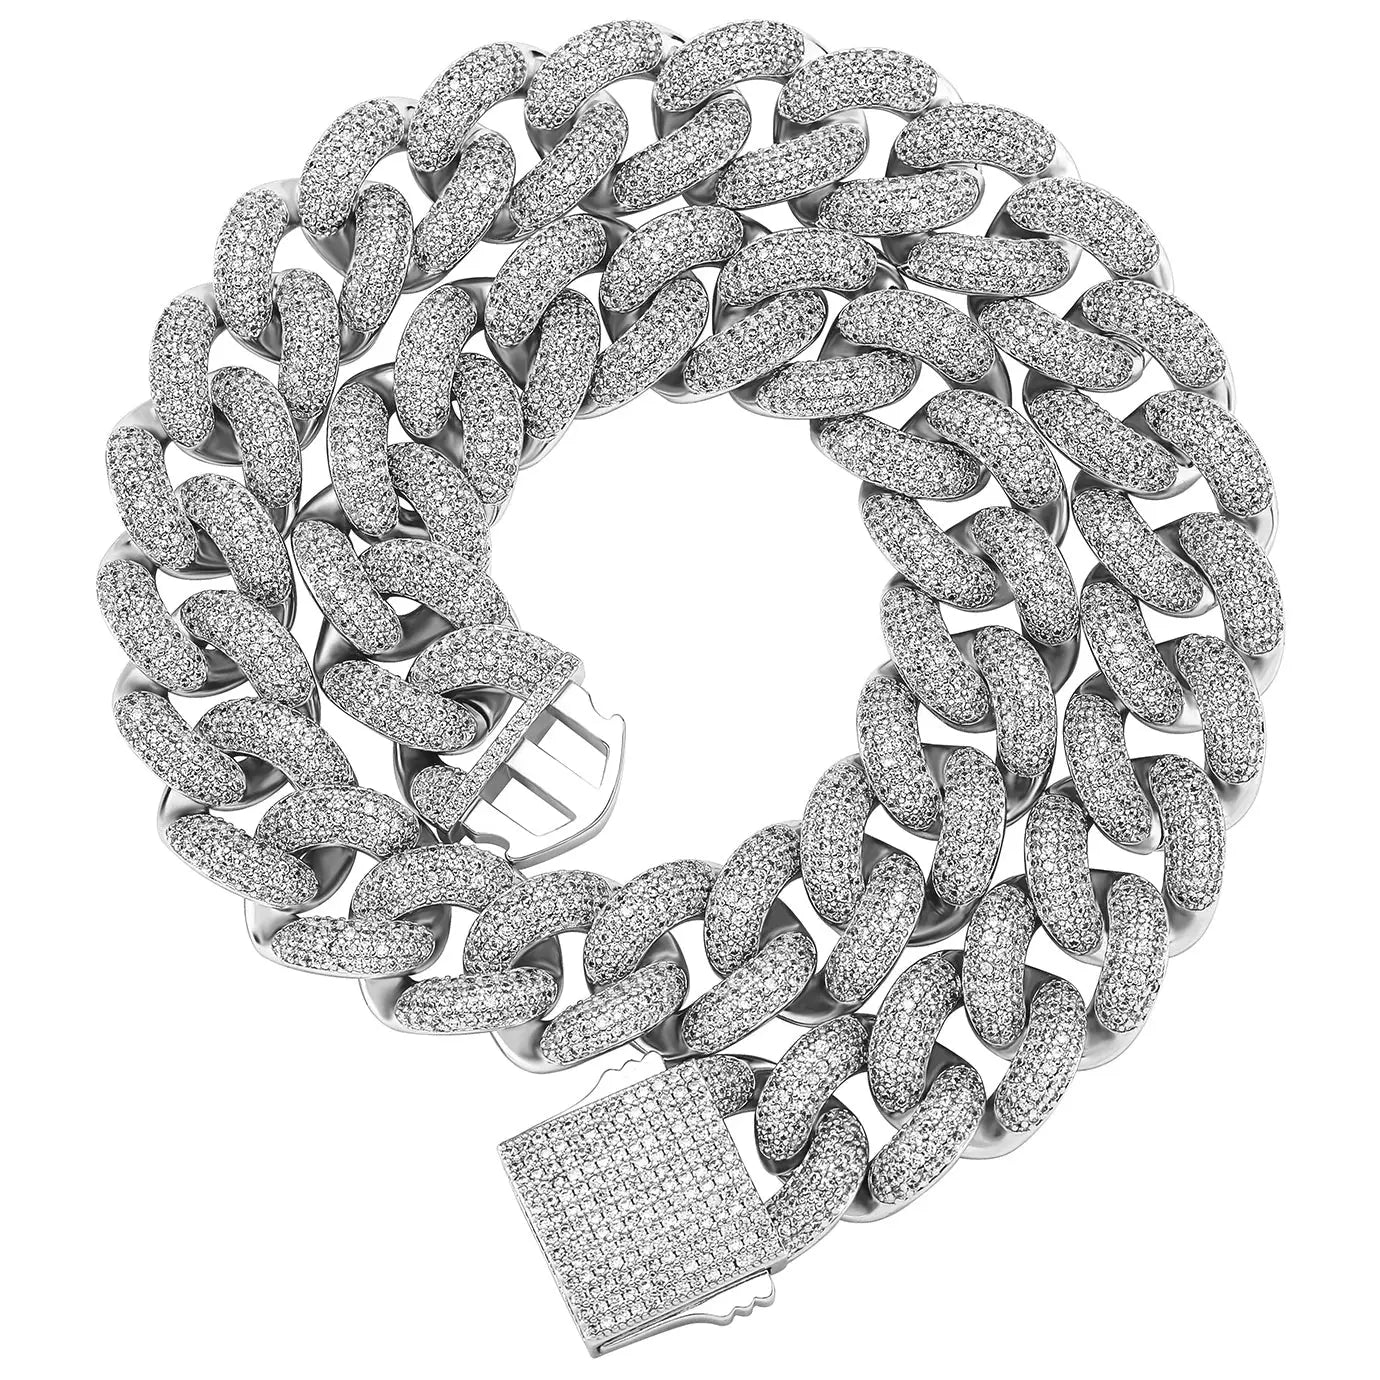 20mm Iced Cuban Link Chain in White Gold 2255.9cm  The Icetruck